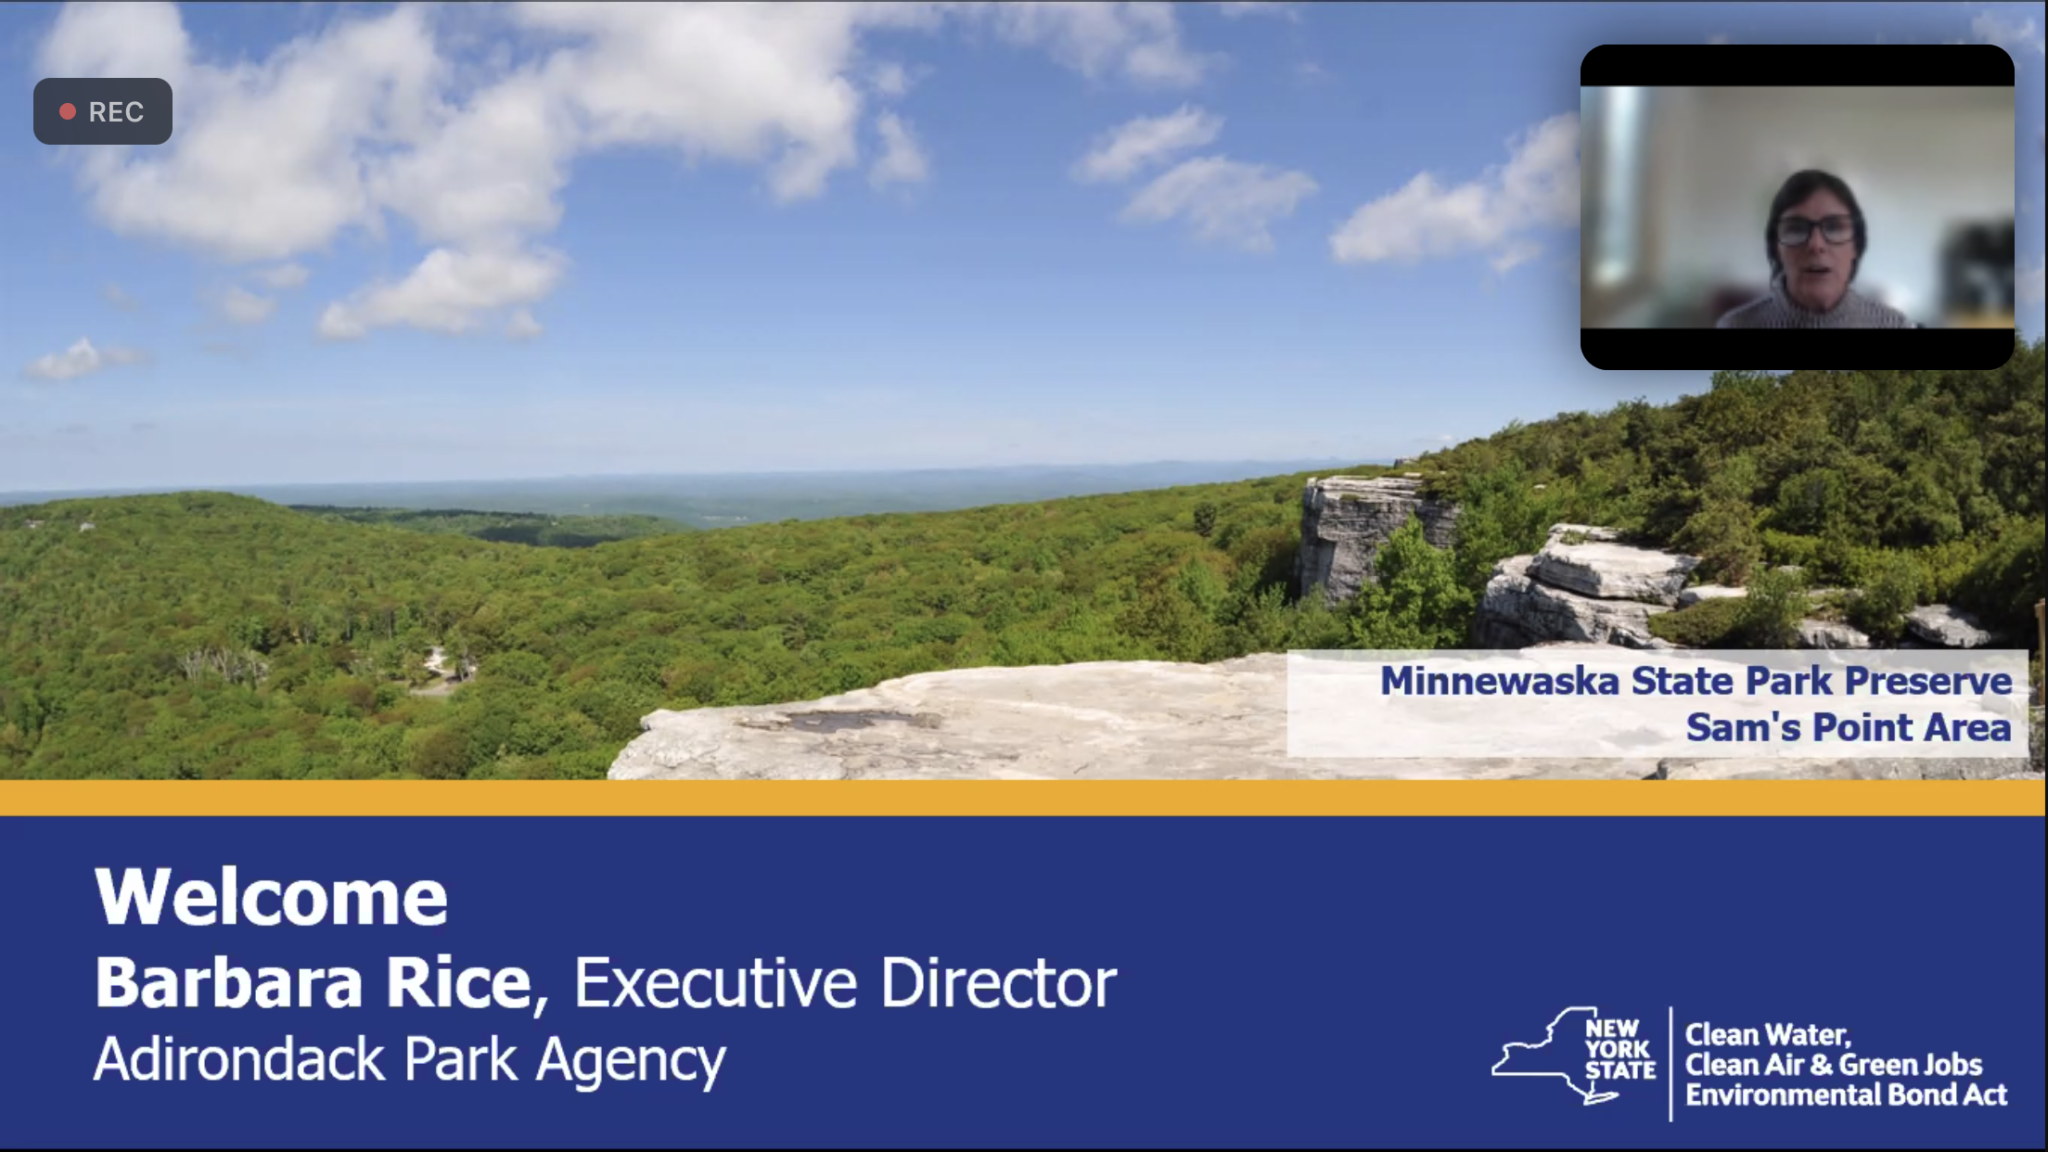 A screenshot shows a virtual presentation, hosted by Executive Director of the Adirondack Park Agency Barbara Rice, about the $4.2 billion Clean Water, Clean Air and Green Jobs Environmental Bond Act.